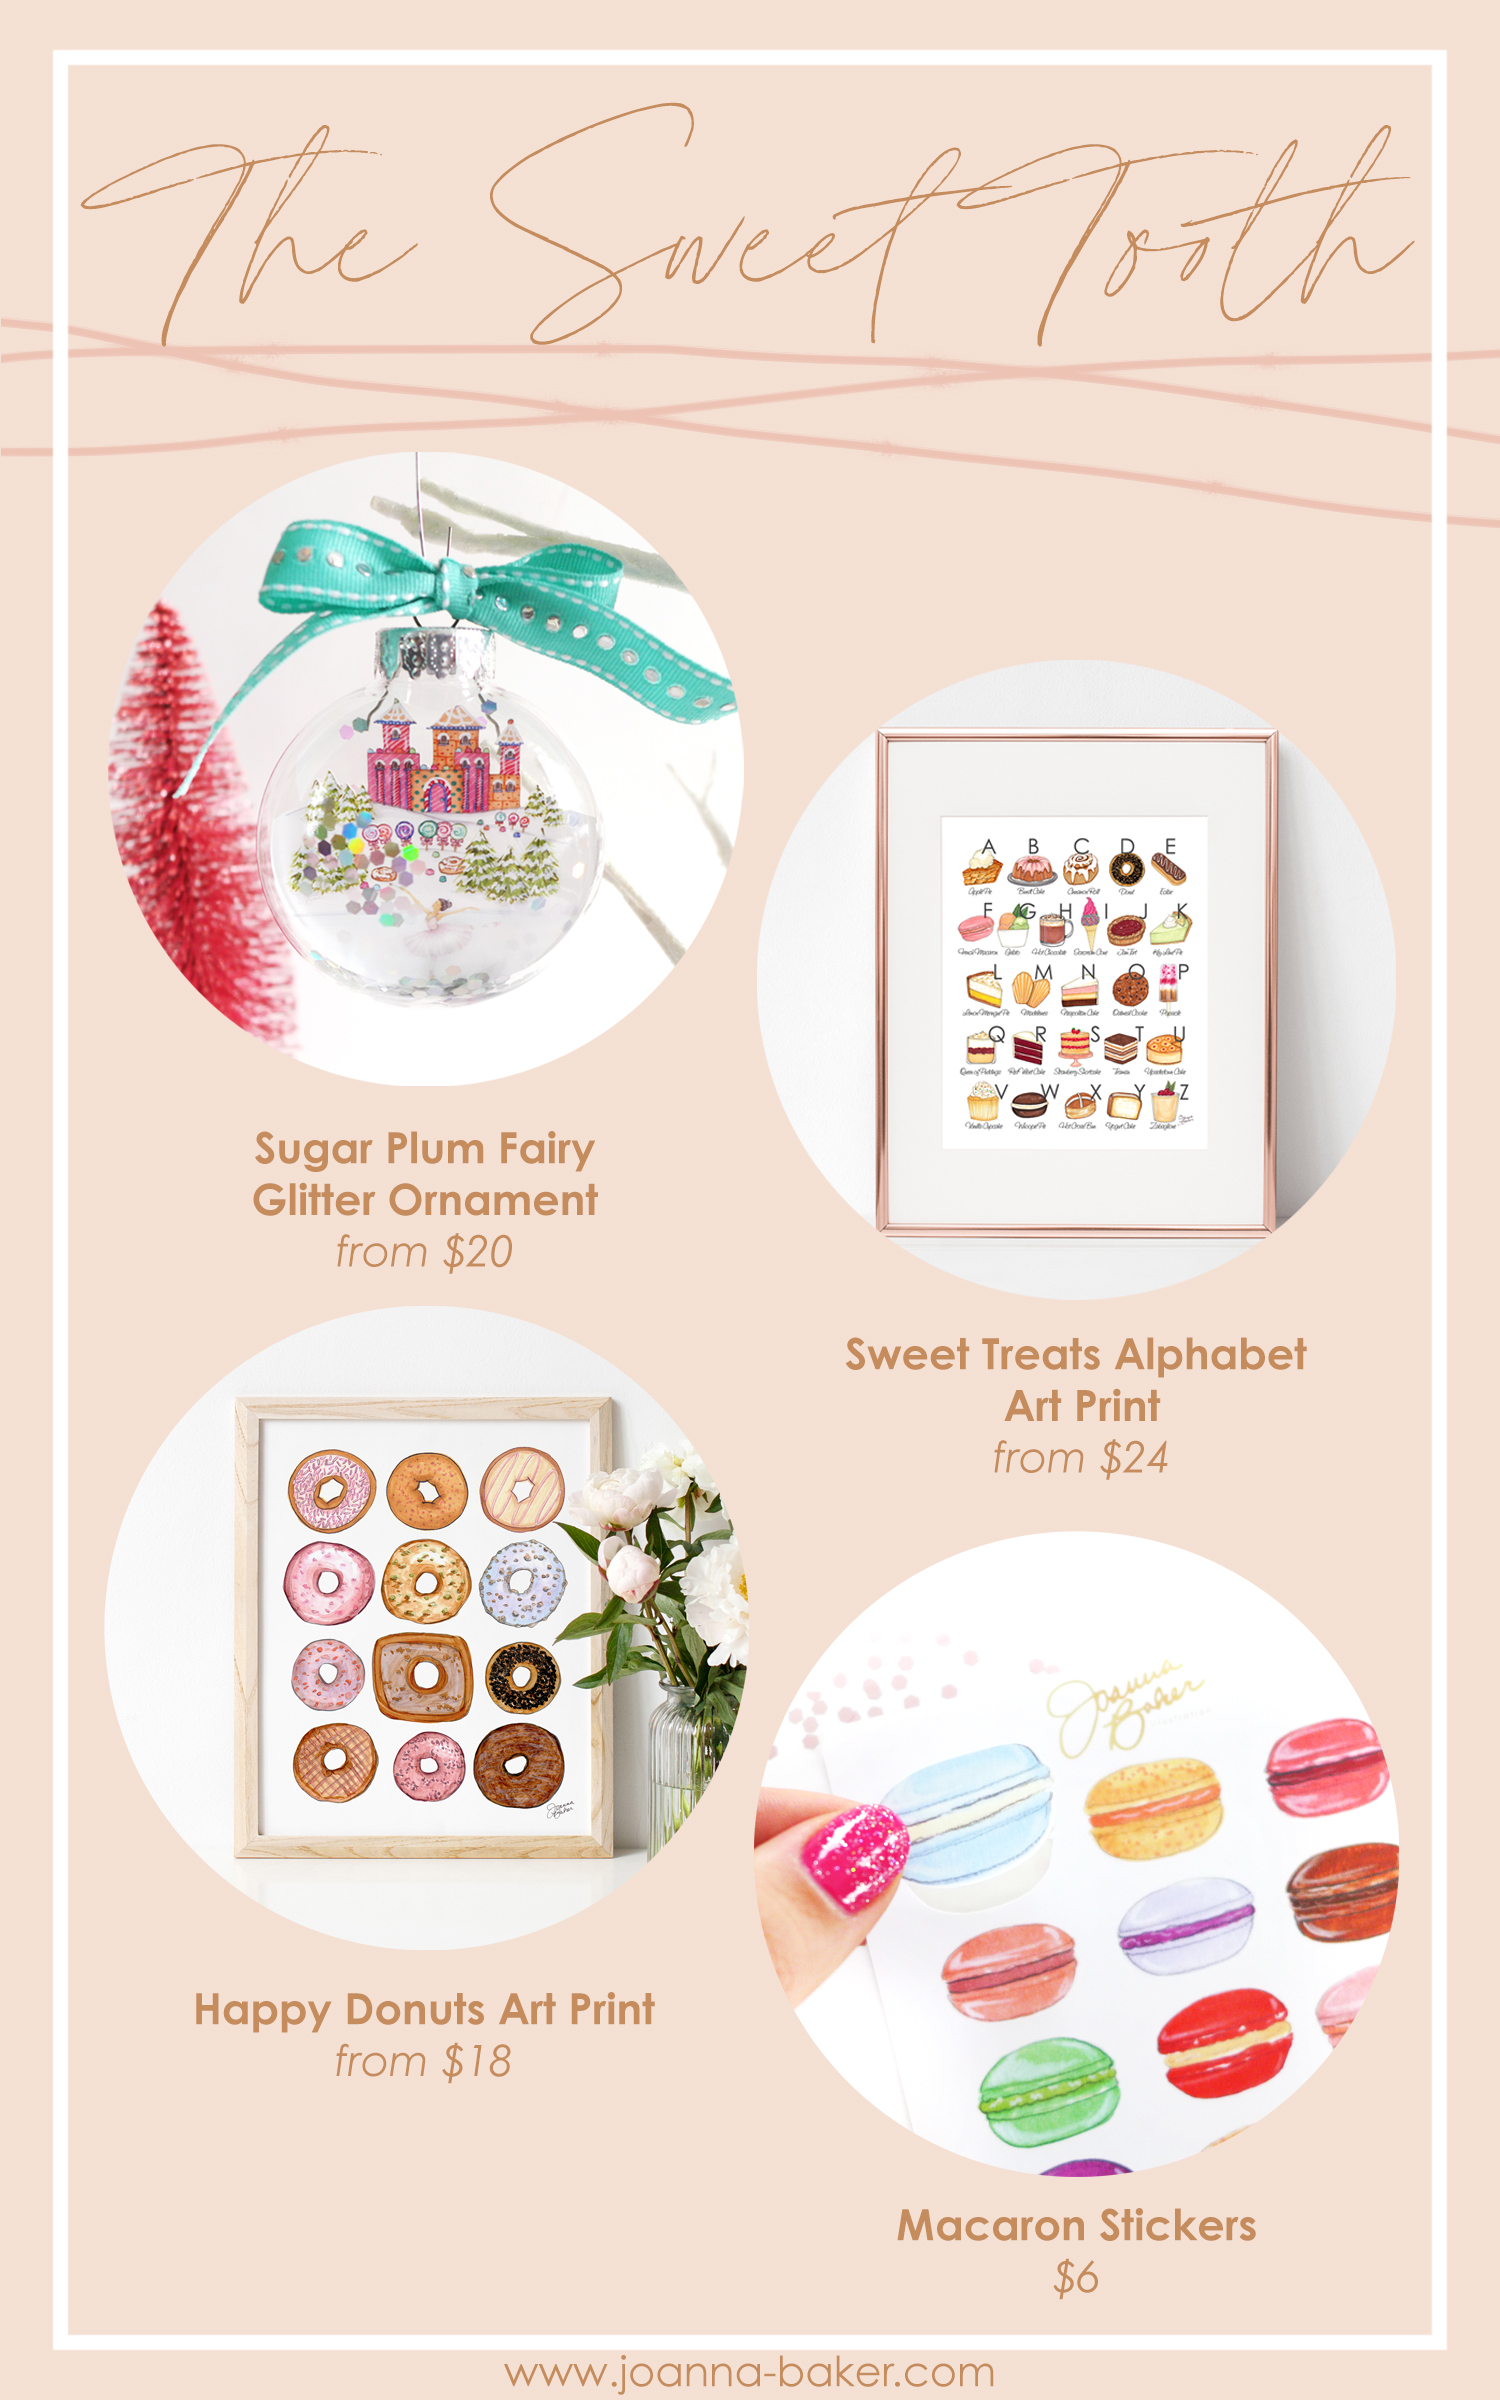 2020 Illustrated Gift Guide for The Sweet Tooth by Joanna Baker Illustration